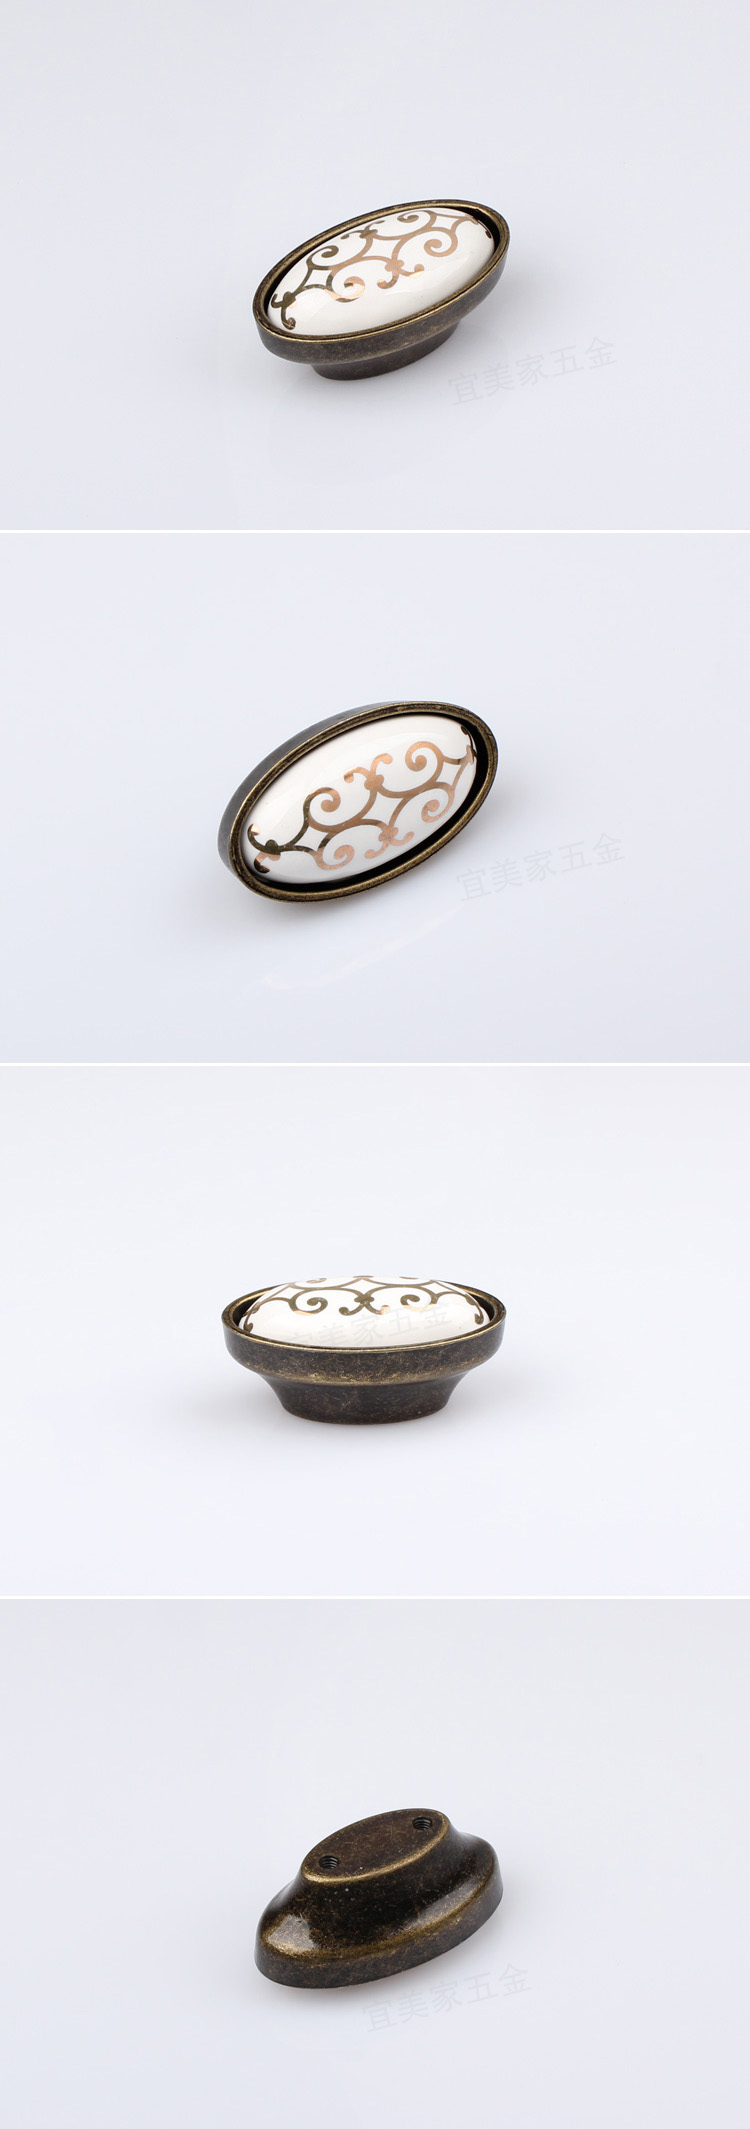 MAU88AB 22mm grand oval bronze-colored golden flower ceramic handle for cabinet/drawer